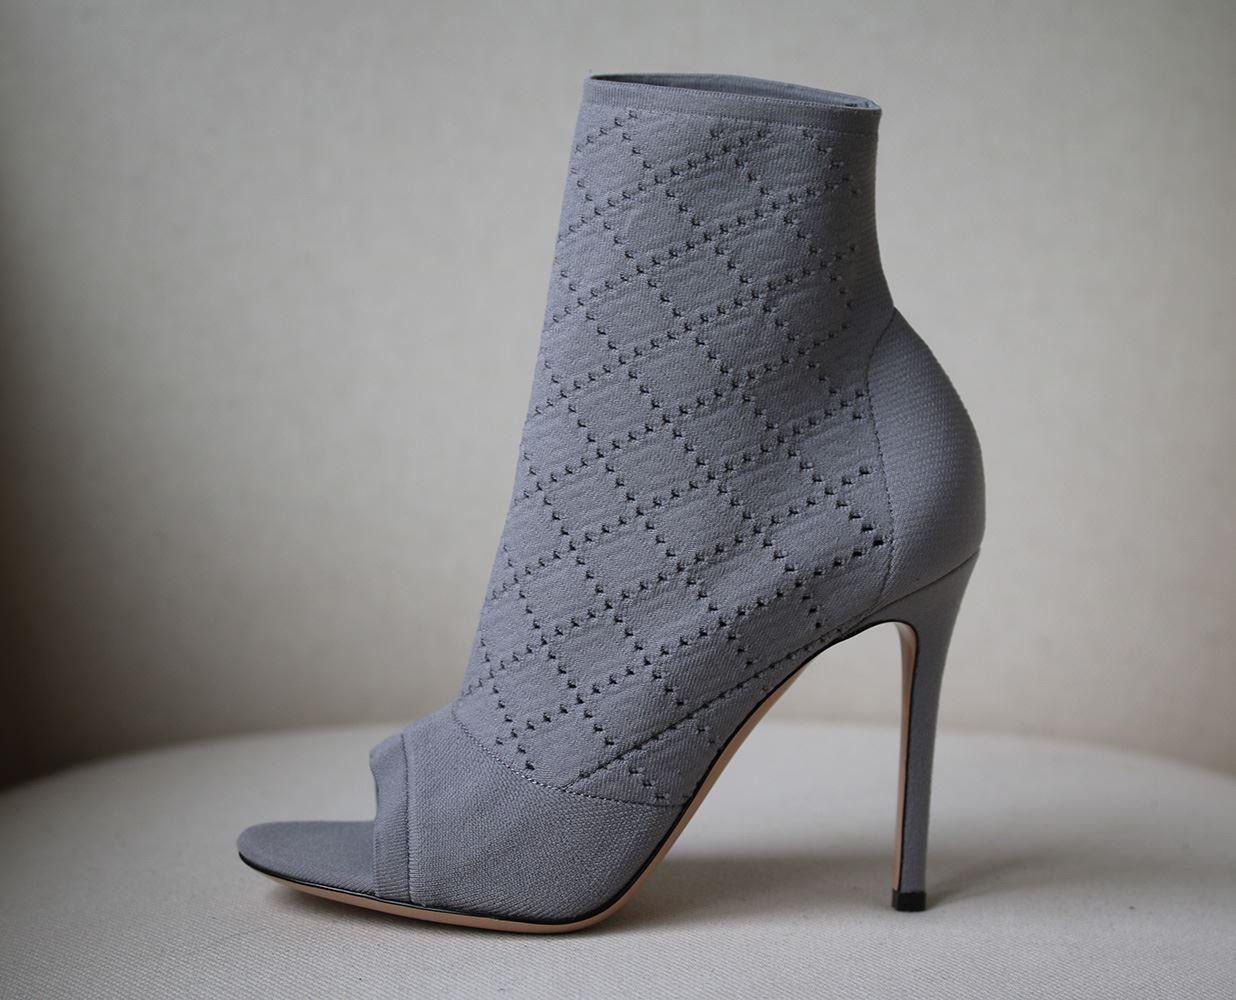 These grey Gianvito Rossi open-toed boots are made in Italy from a perforated stretch knit material and feature a 105mm stiletto heel. Amy Adams one said, 